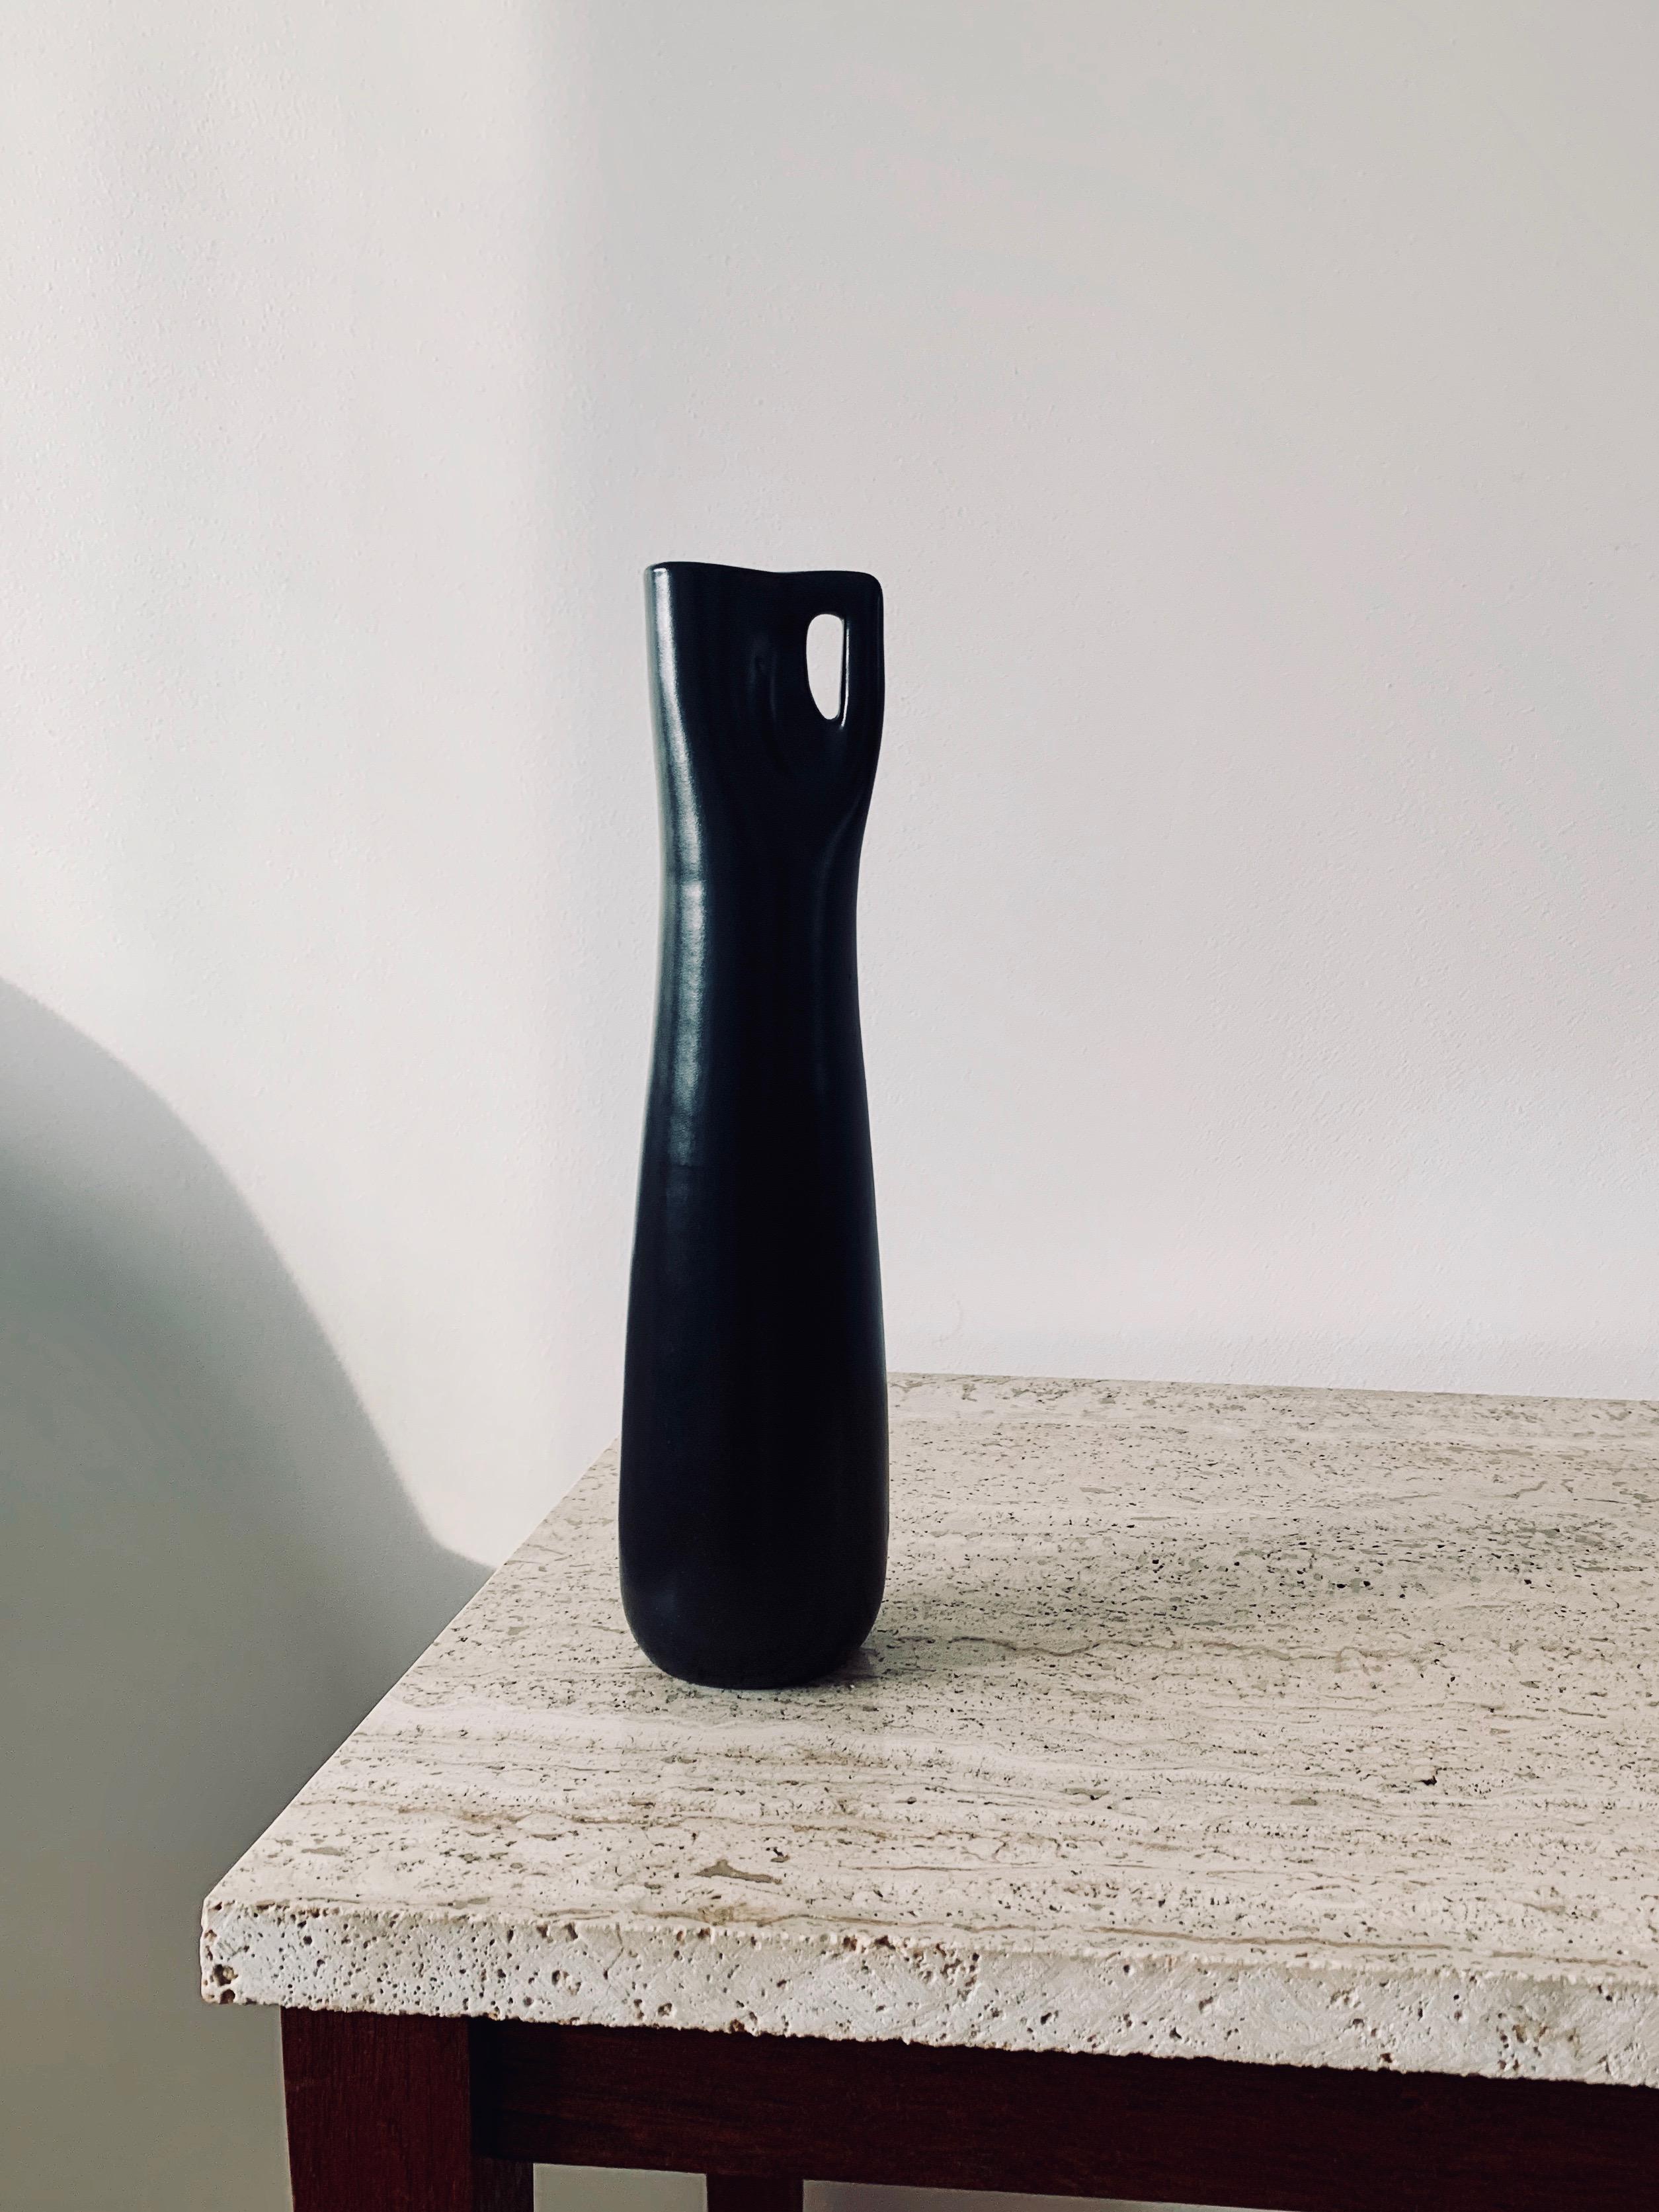 Ingrid Atterberg designed the Somali series for Upsala Ekeby in 1953. It consists of six objects with elegant shapes and silk matte, black glaze. This is model 2142, the second tallest vase in the series.

Measures: Height: 26.5 cm

Diameter: 7